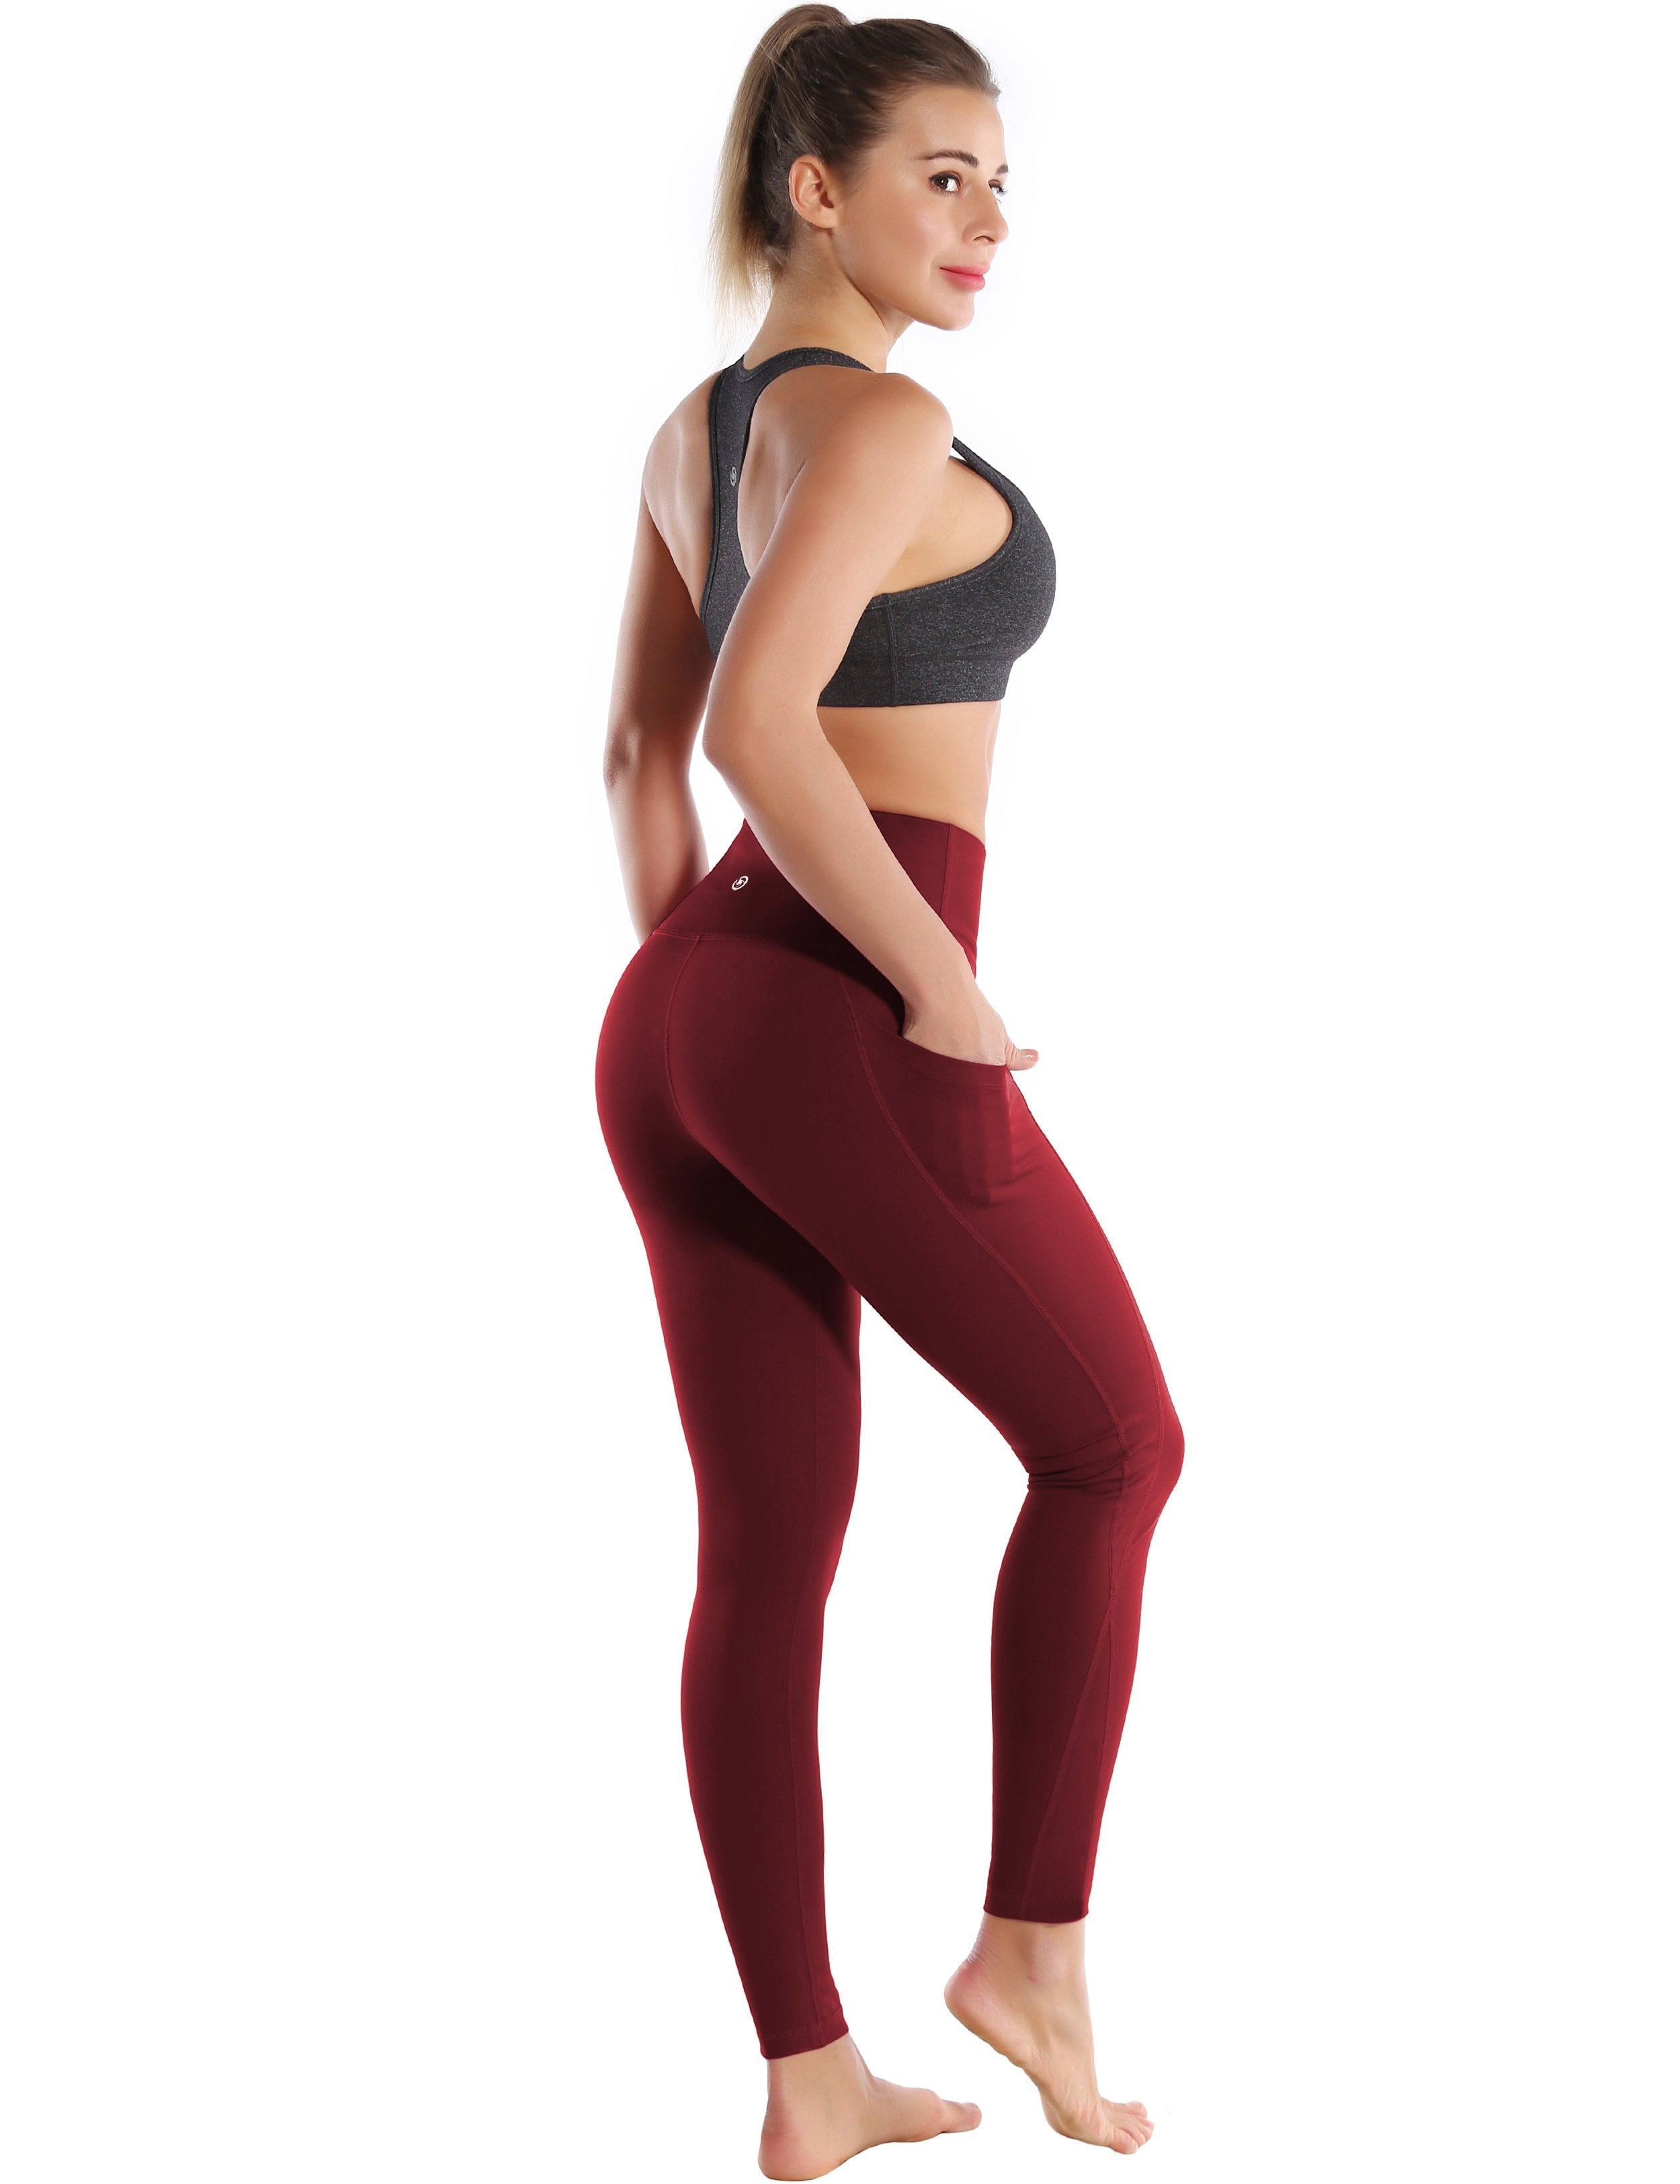 High Waist Side Pockets yogastudio Pants cherryred 75% Nylon, 25% Spandex Fabric doesn't attract lint easily 4-way stretch No see-through Moisture-wicking Tummy control Inner pocket